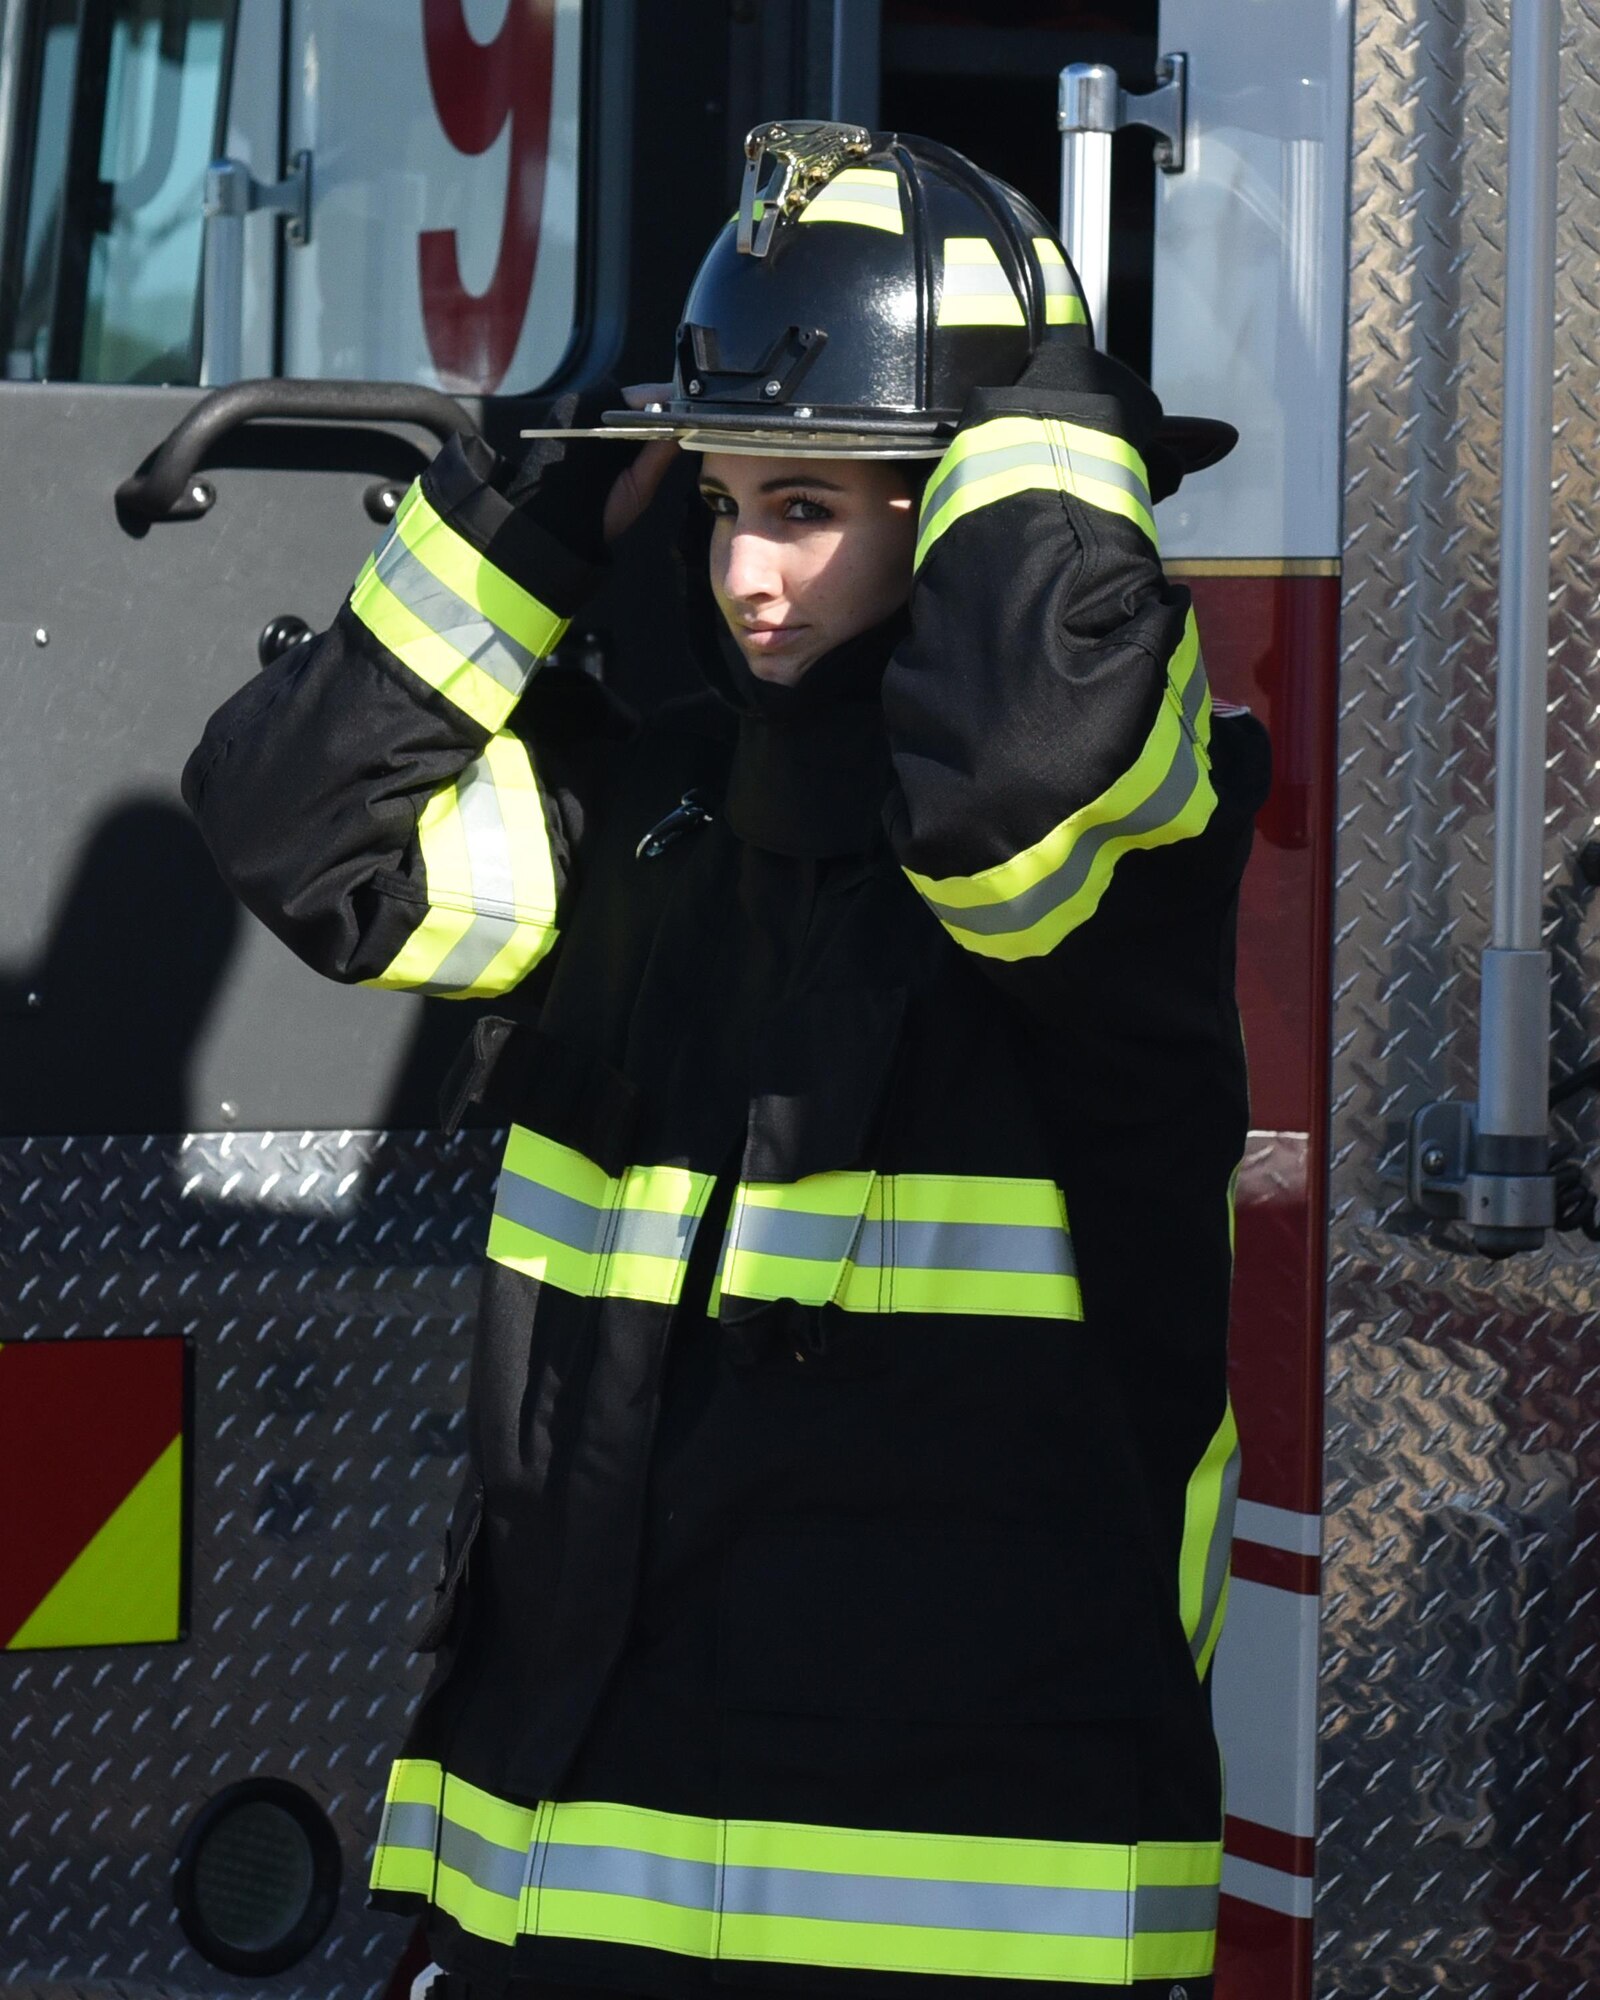 U.S. Air Force Airman 1st Class Casarah Pine, 325th Force Support Squadron food services specialist, dresses in fire protection gear during her Air Force Specialty immersion at Tyndall Air Force Base, Fla., Dec. 7, 2016. The program is used to show Airmen that are interested in cross training, what their potential new job would be like. (U.S. Air Force photo by Airman 1st Class Cody R. Miller/Released)